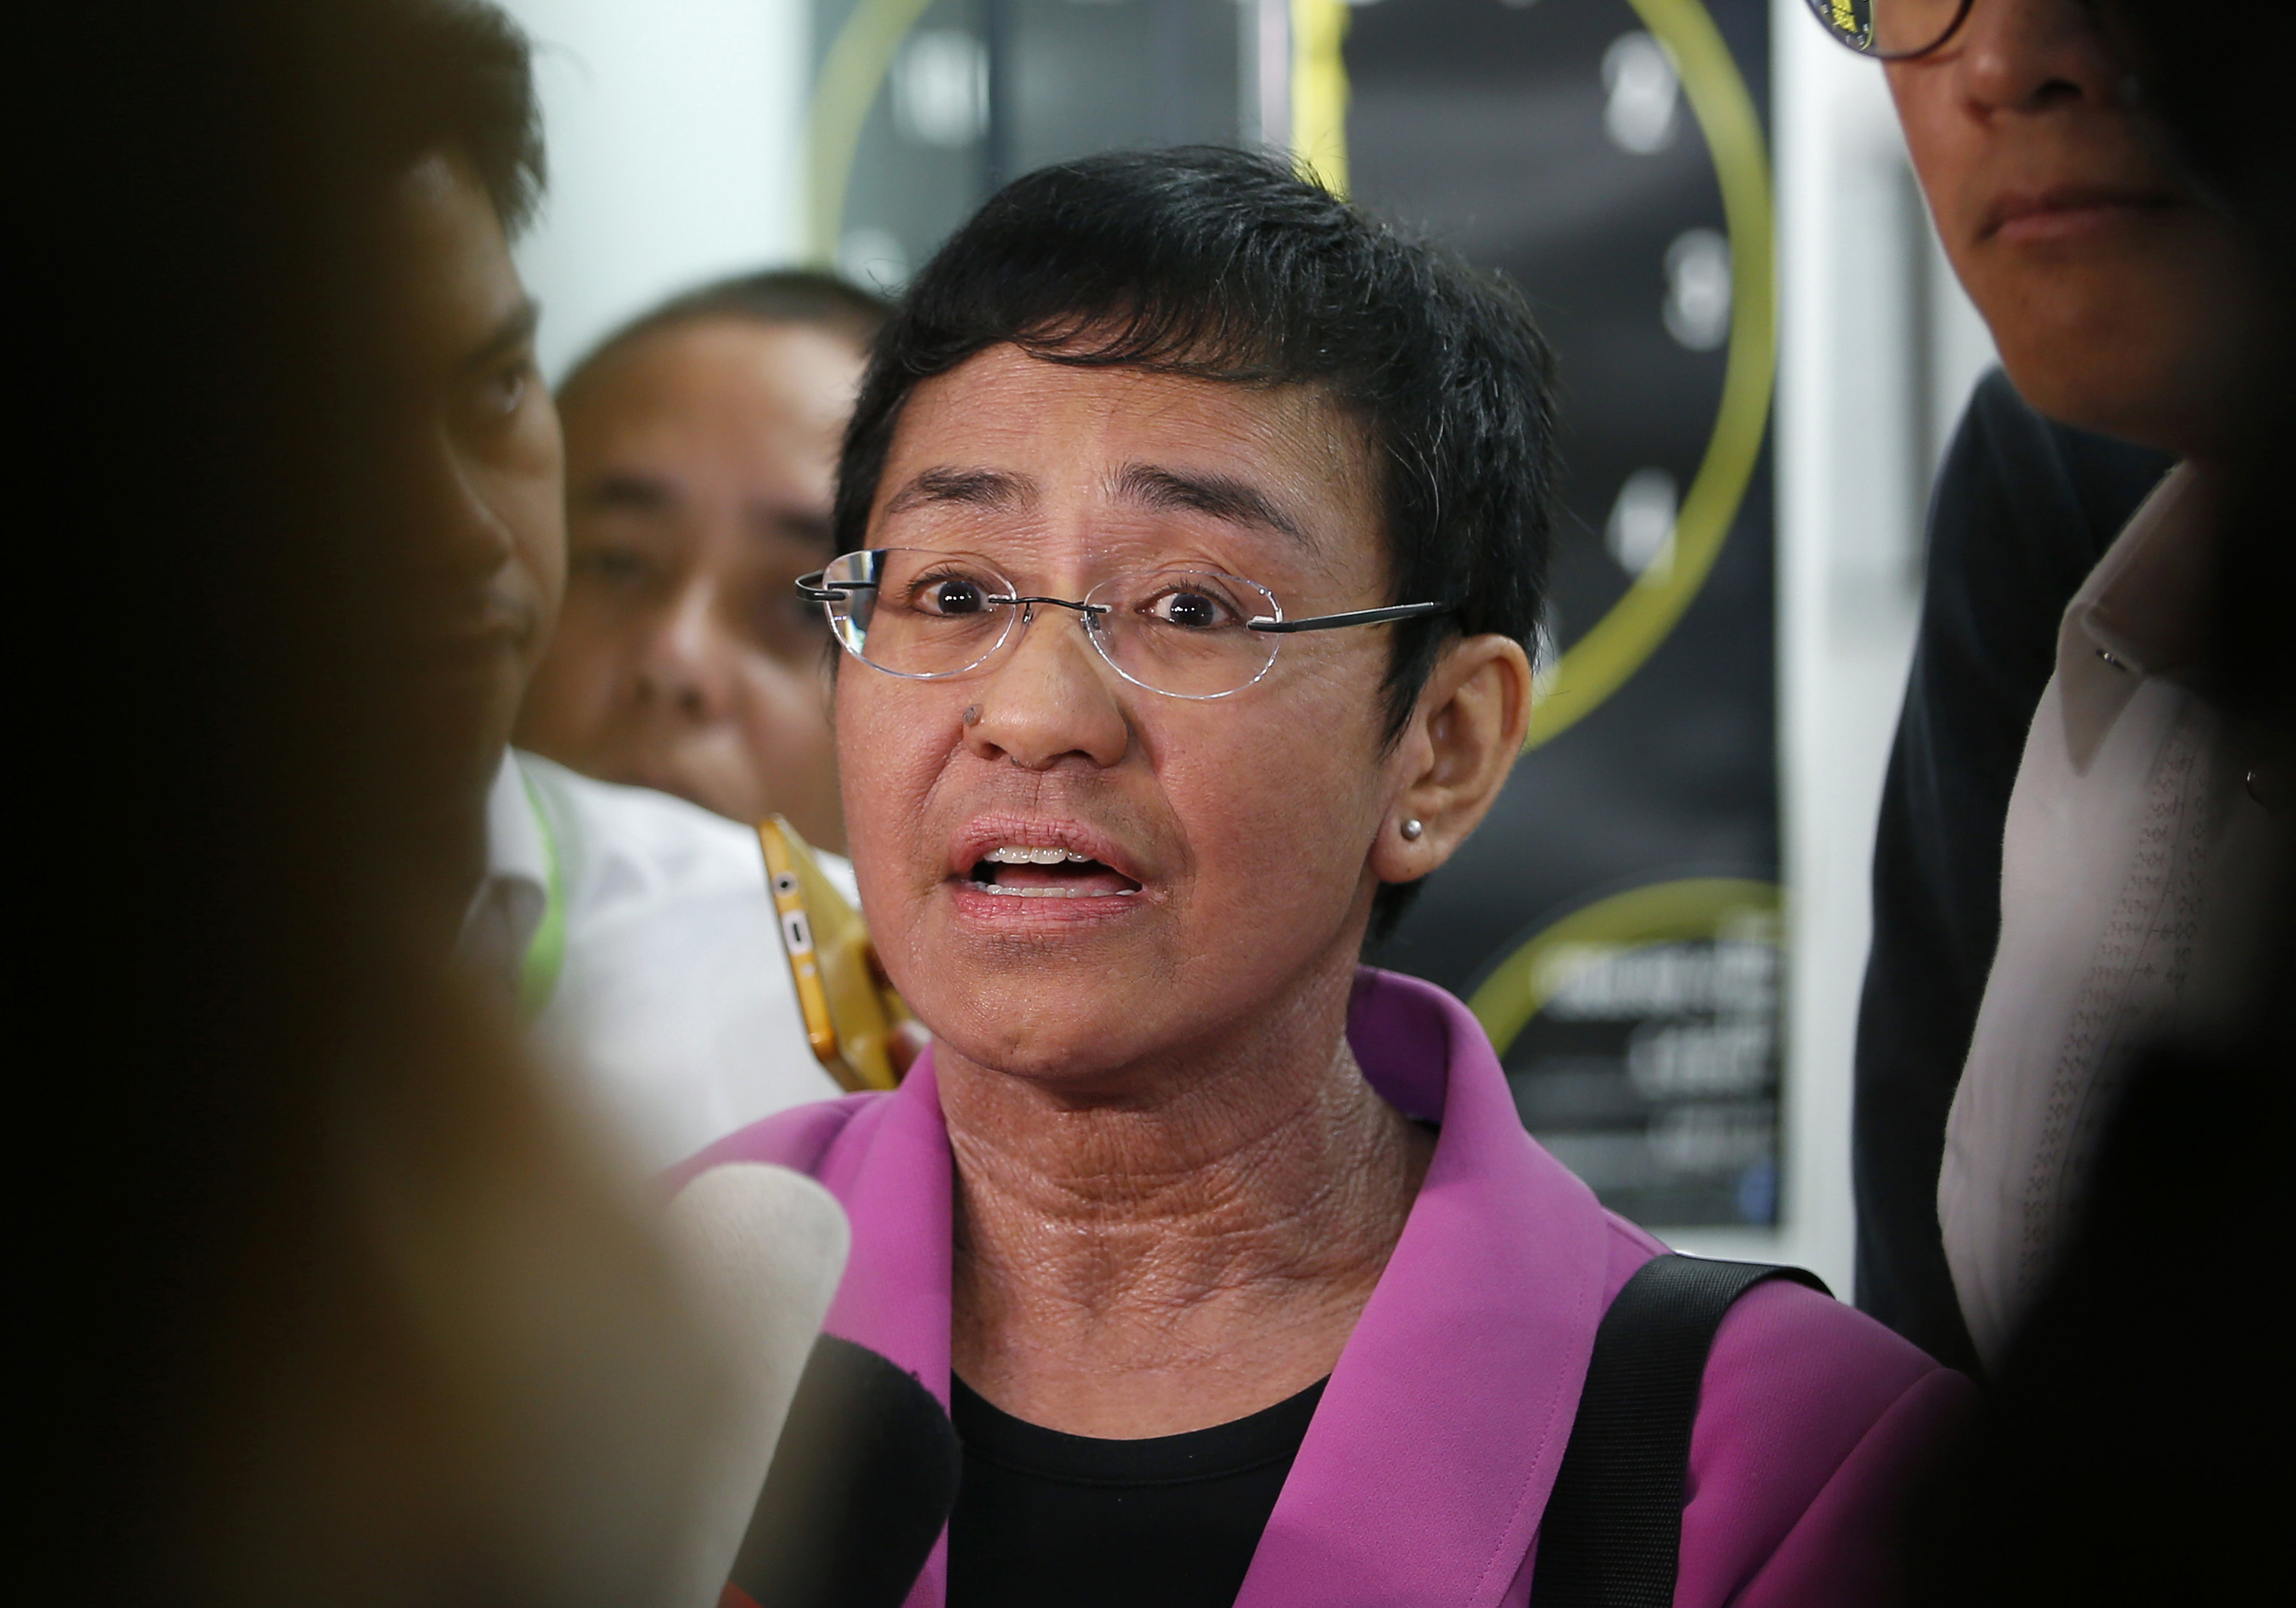 US embassy hopes for quick resolution, due process in Maria Ressa case